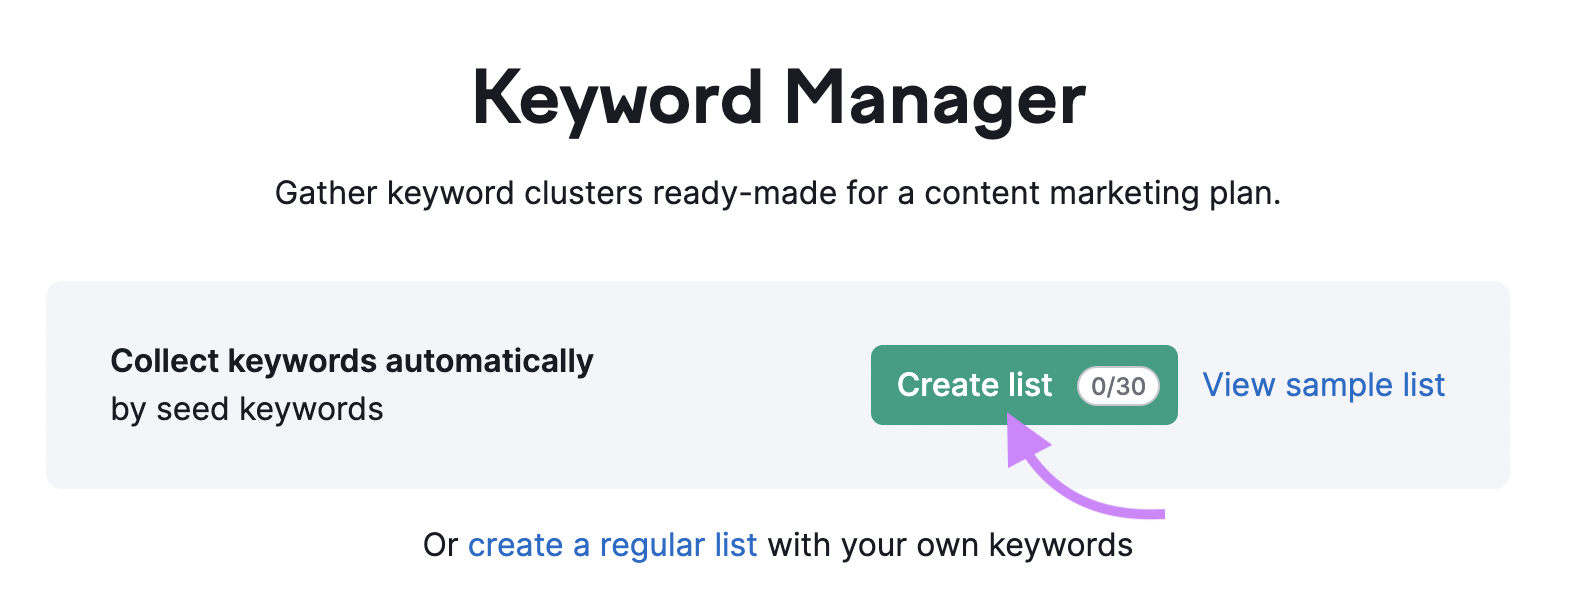 Create a list in Keyword Manager tool